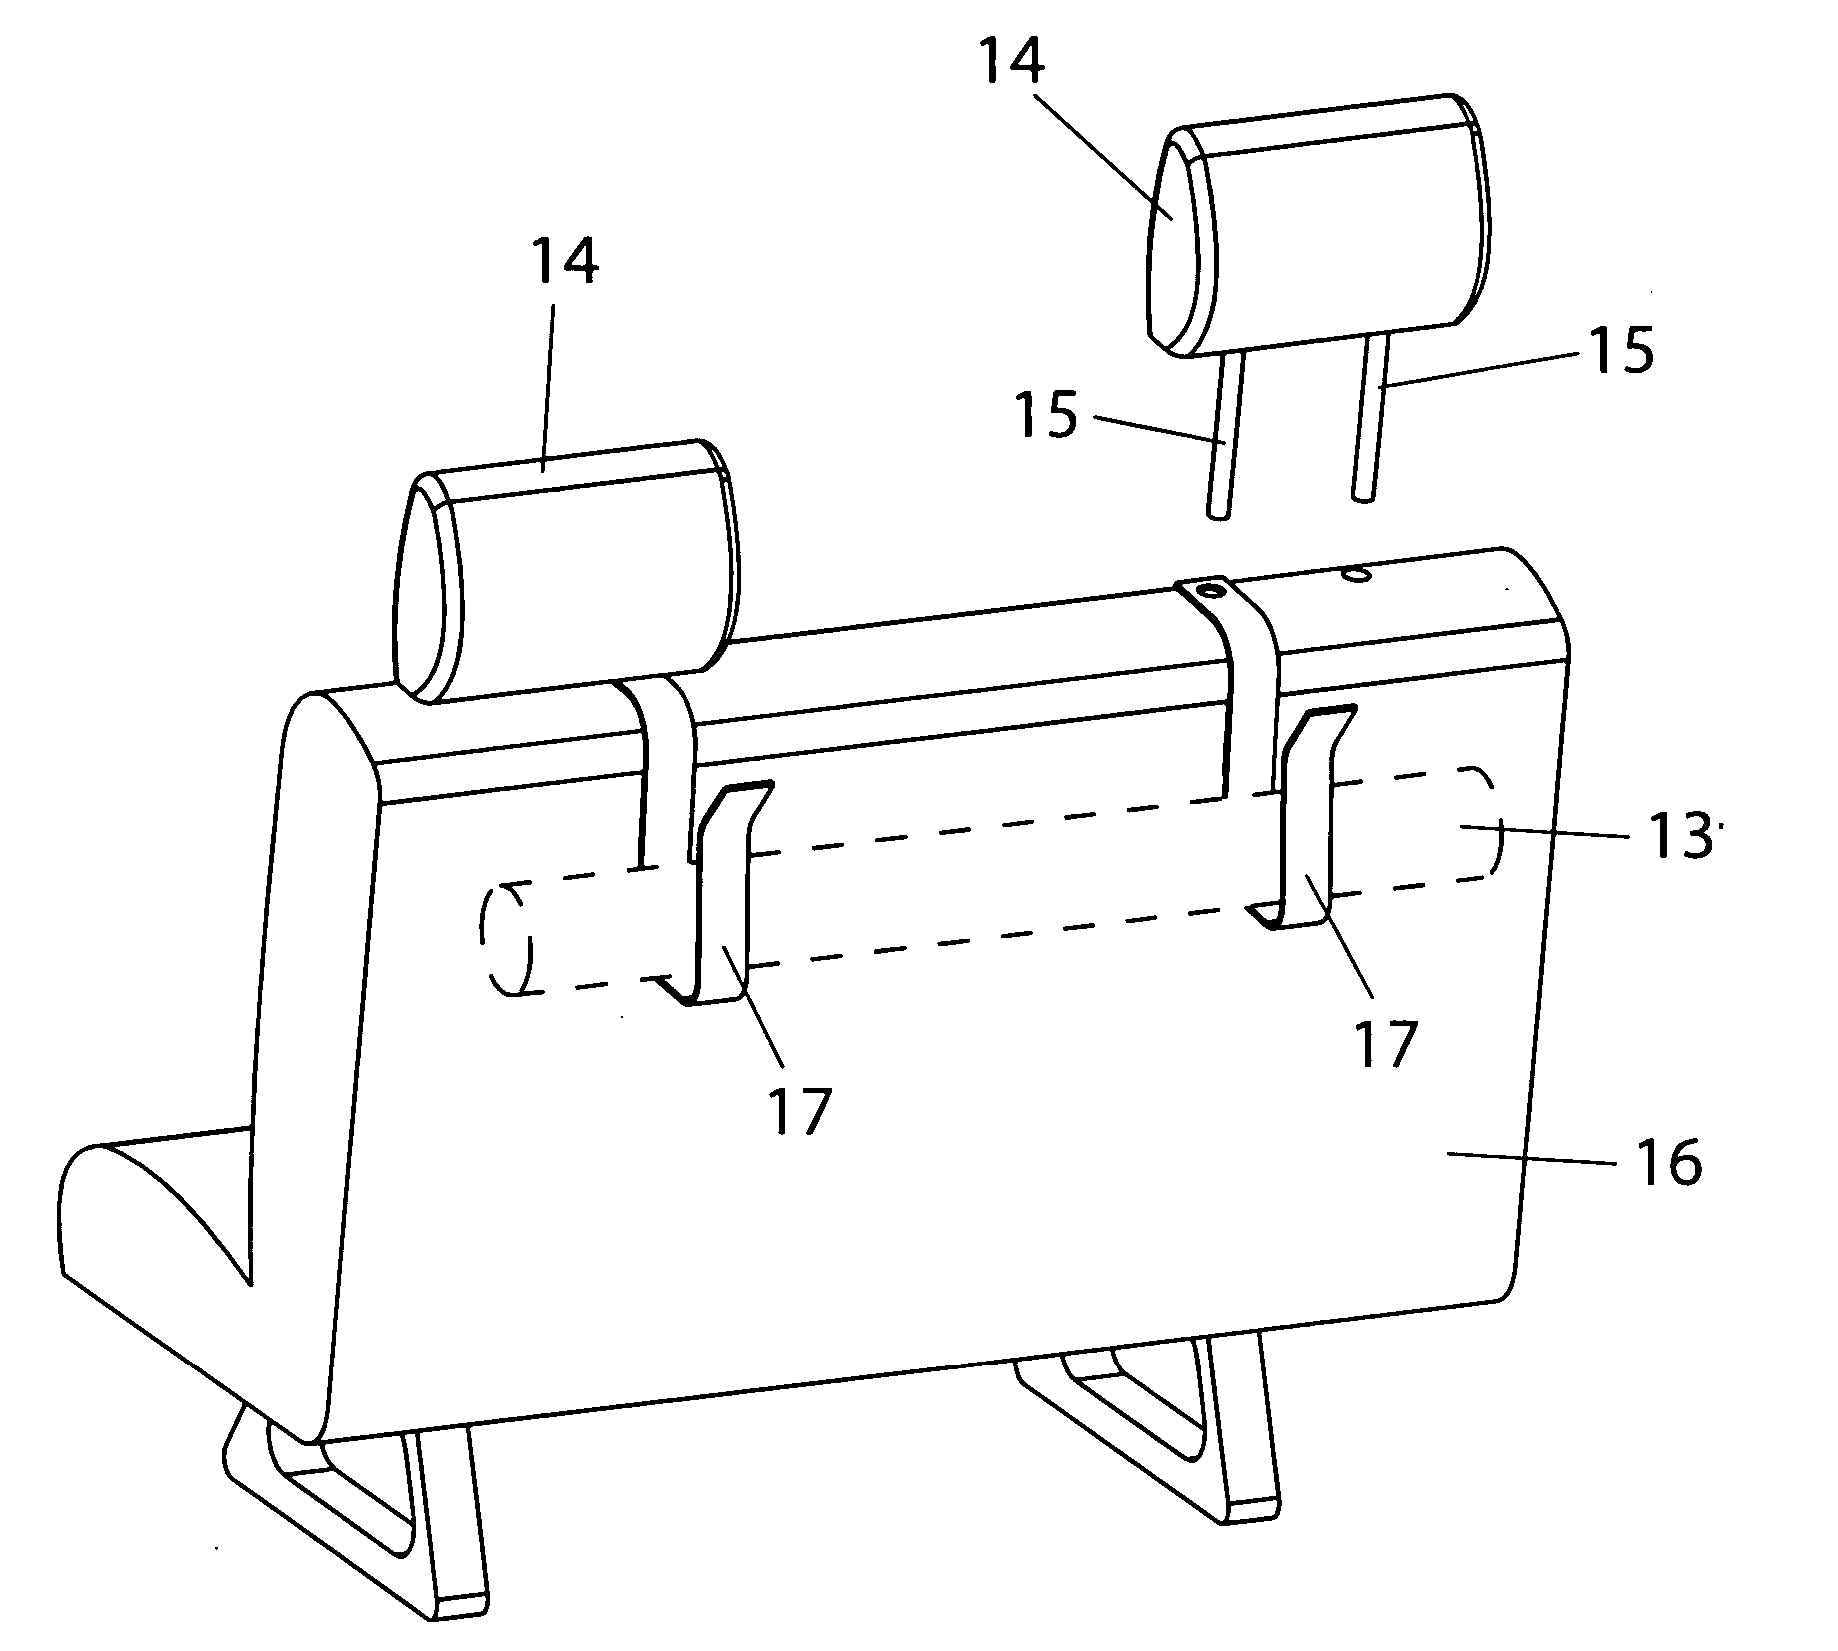 Mounting system for umbrella strollers